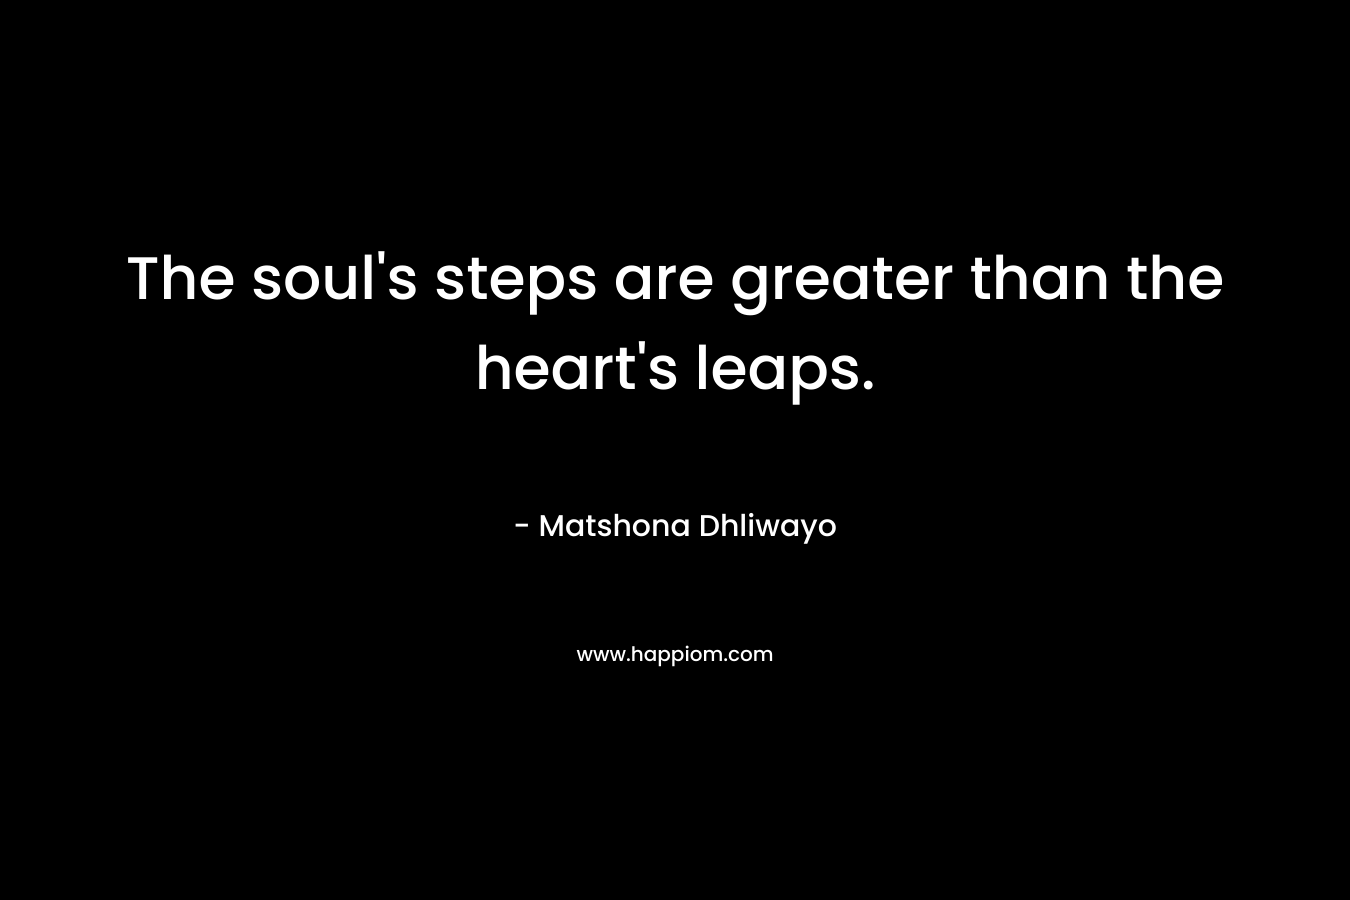 The soul’s steps are greater than the heart’s leaps. – Matshona Dhliwayo